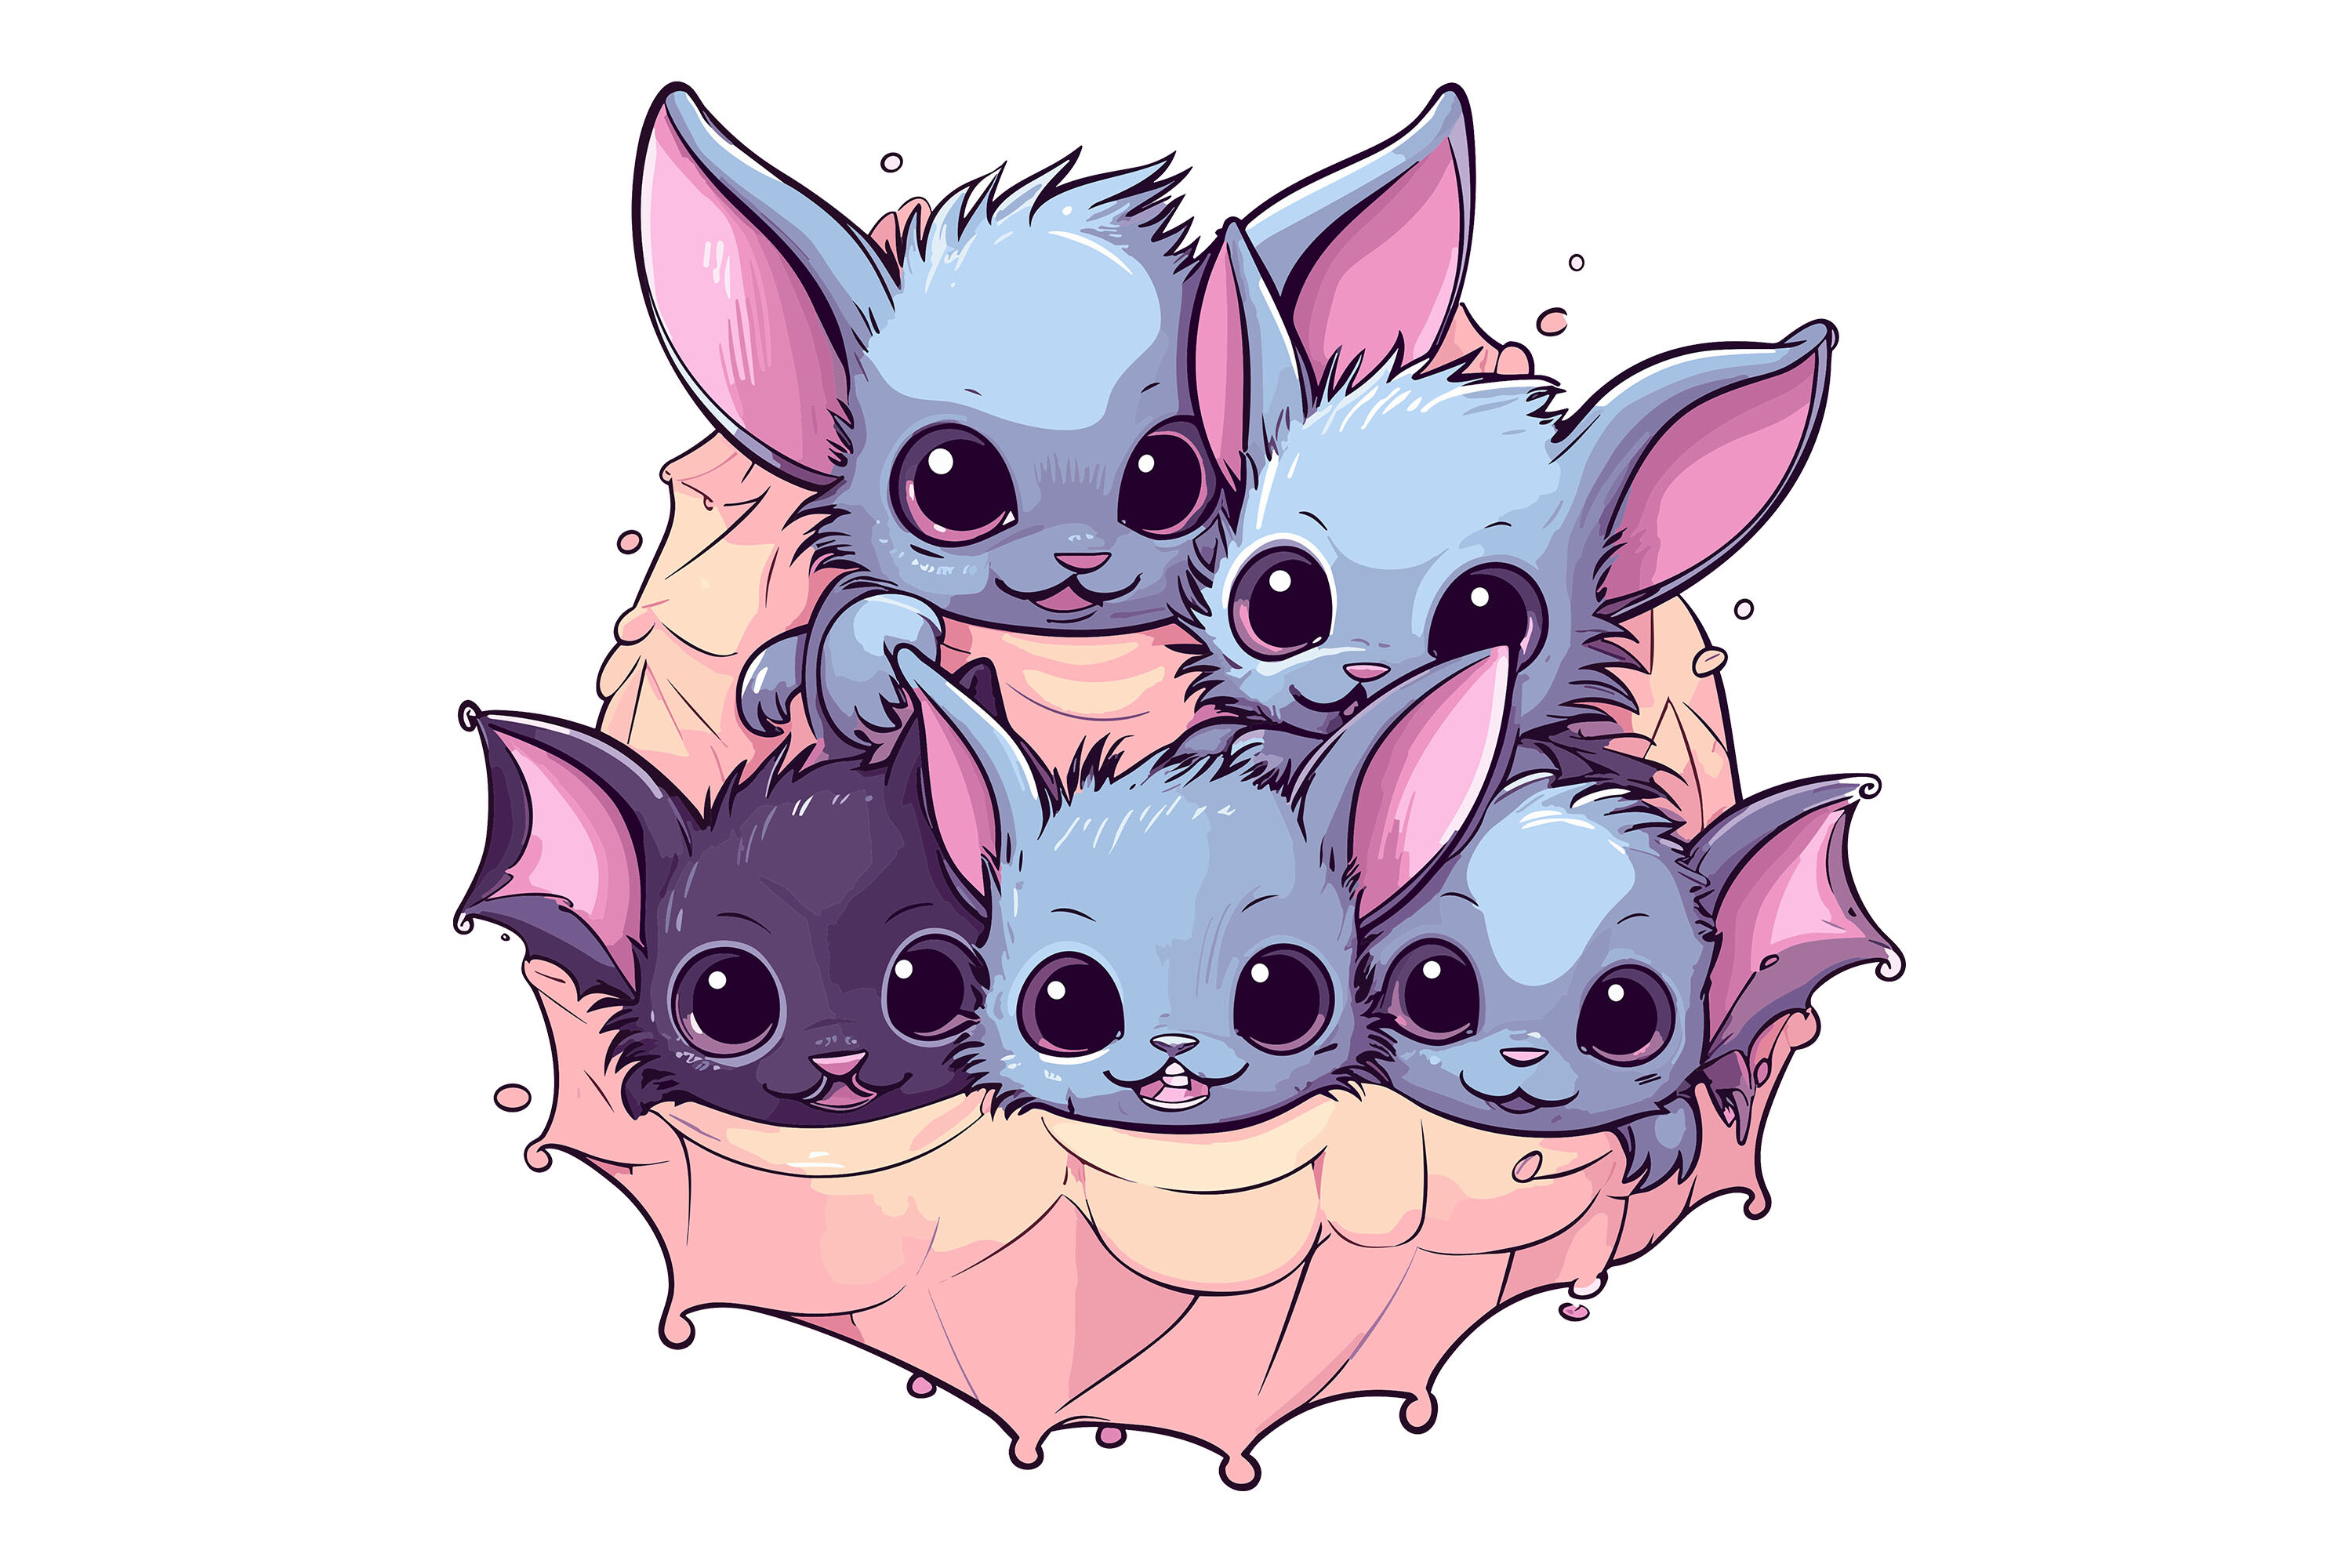 Bat Clipart Graphic by Illustrately · Creative Fabrica